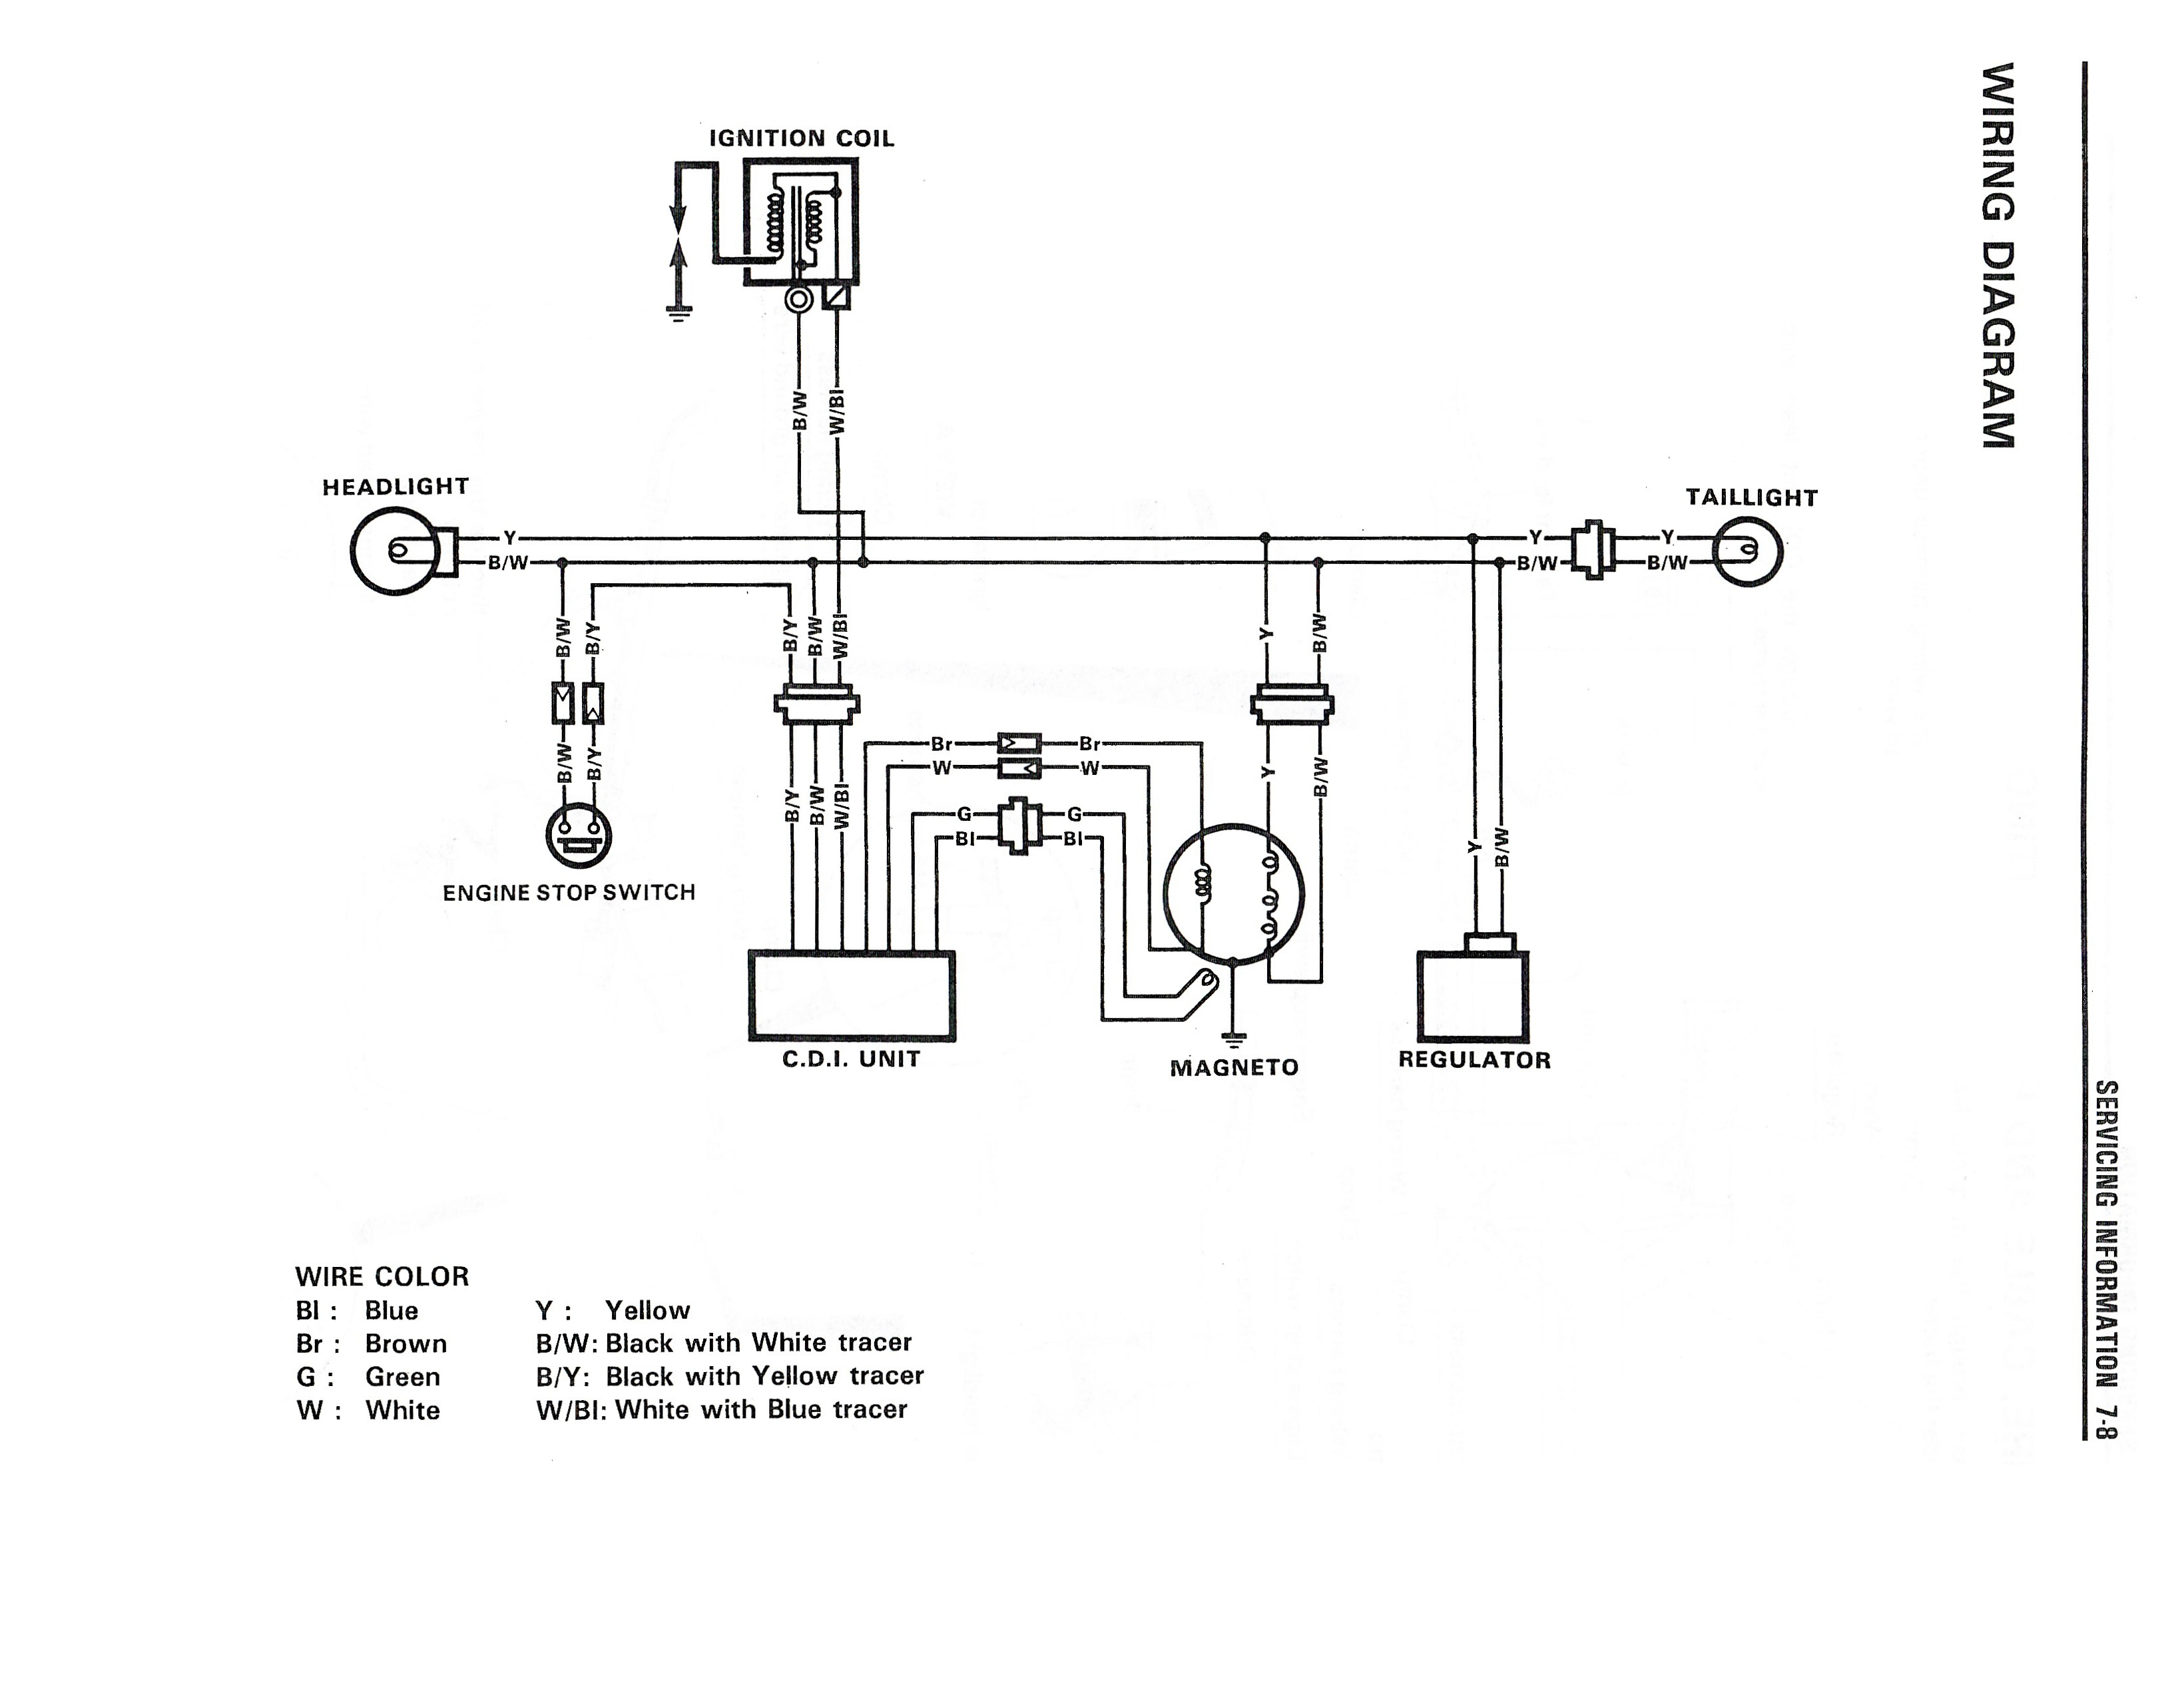 Wiring diagram for the DR350 (1990 and later models)